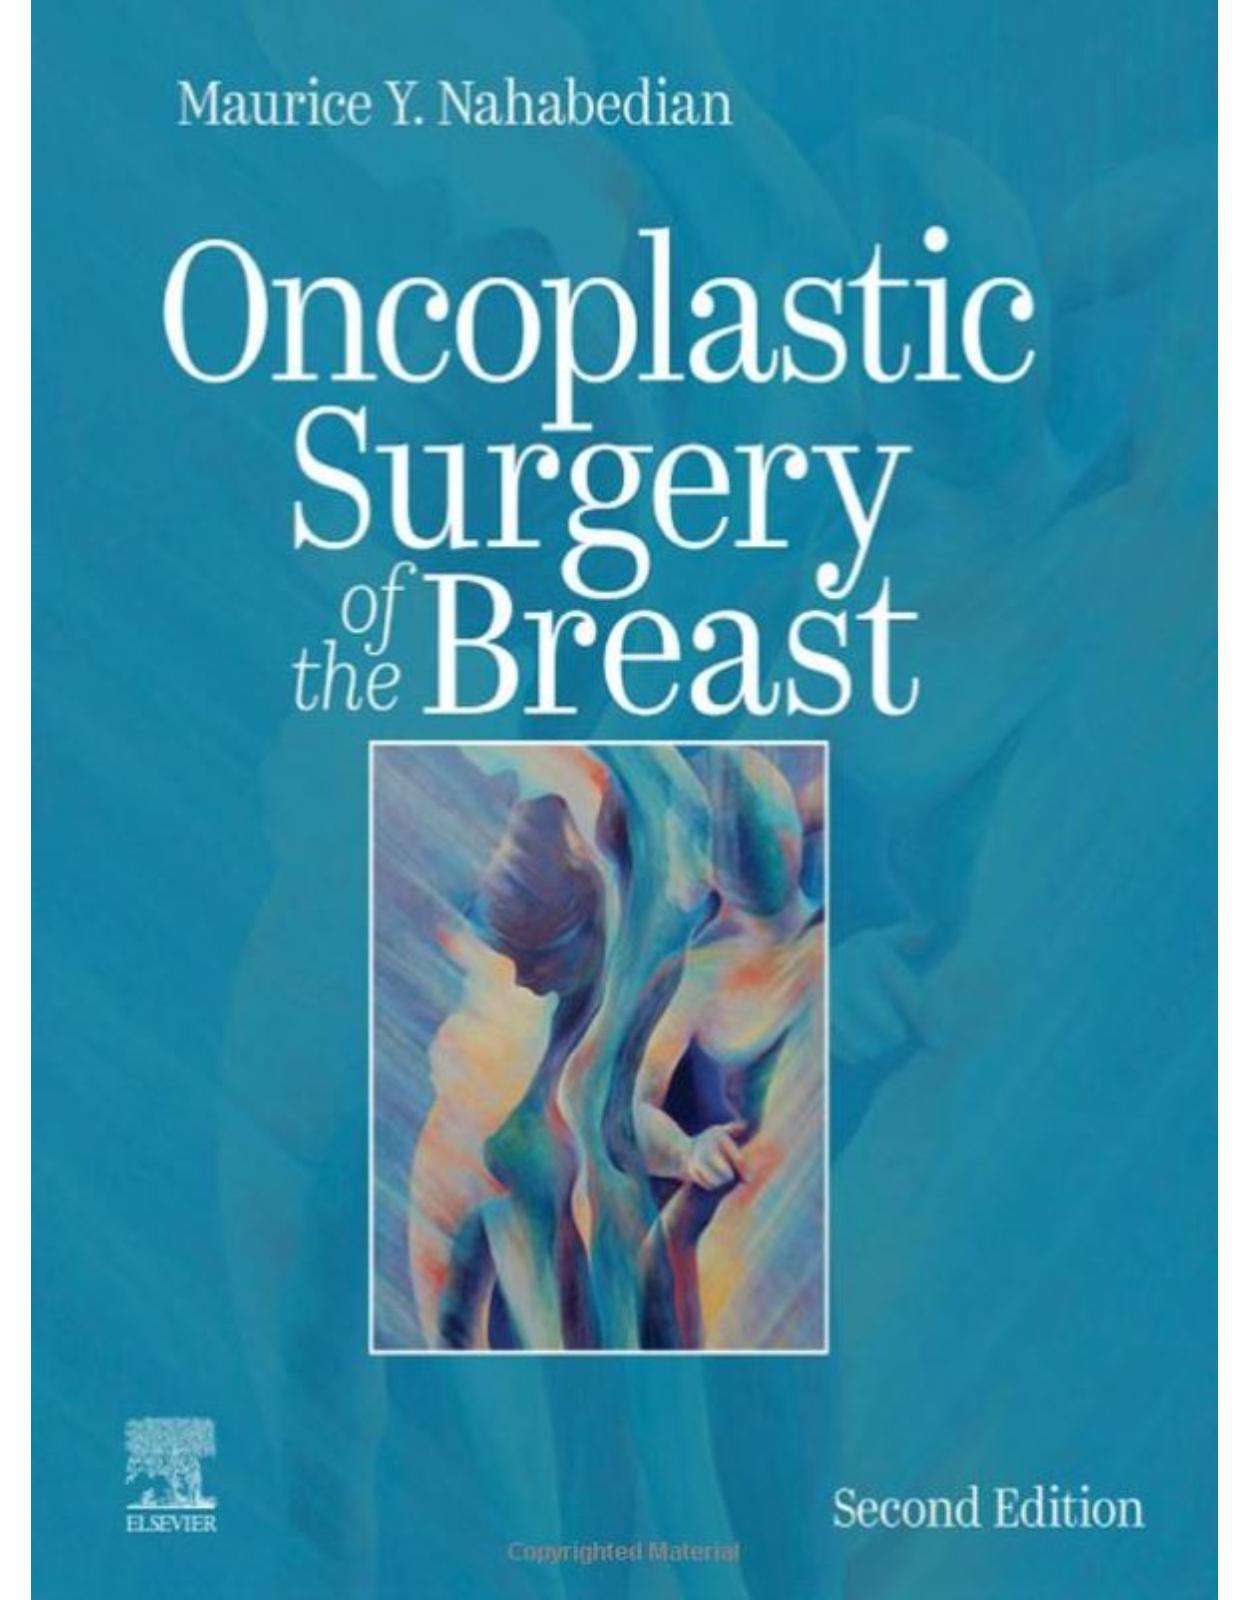 Oncoplastic Surgery of the Breast, 2nd Edition